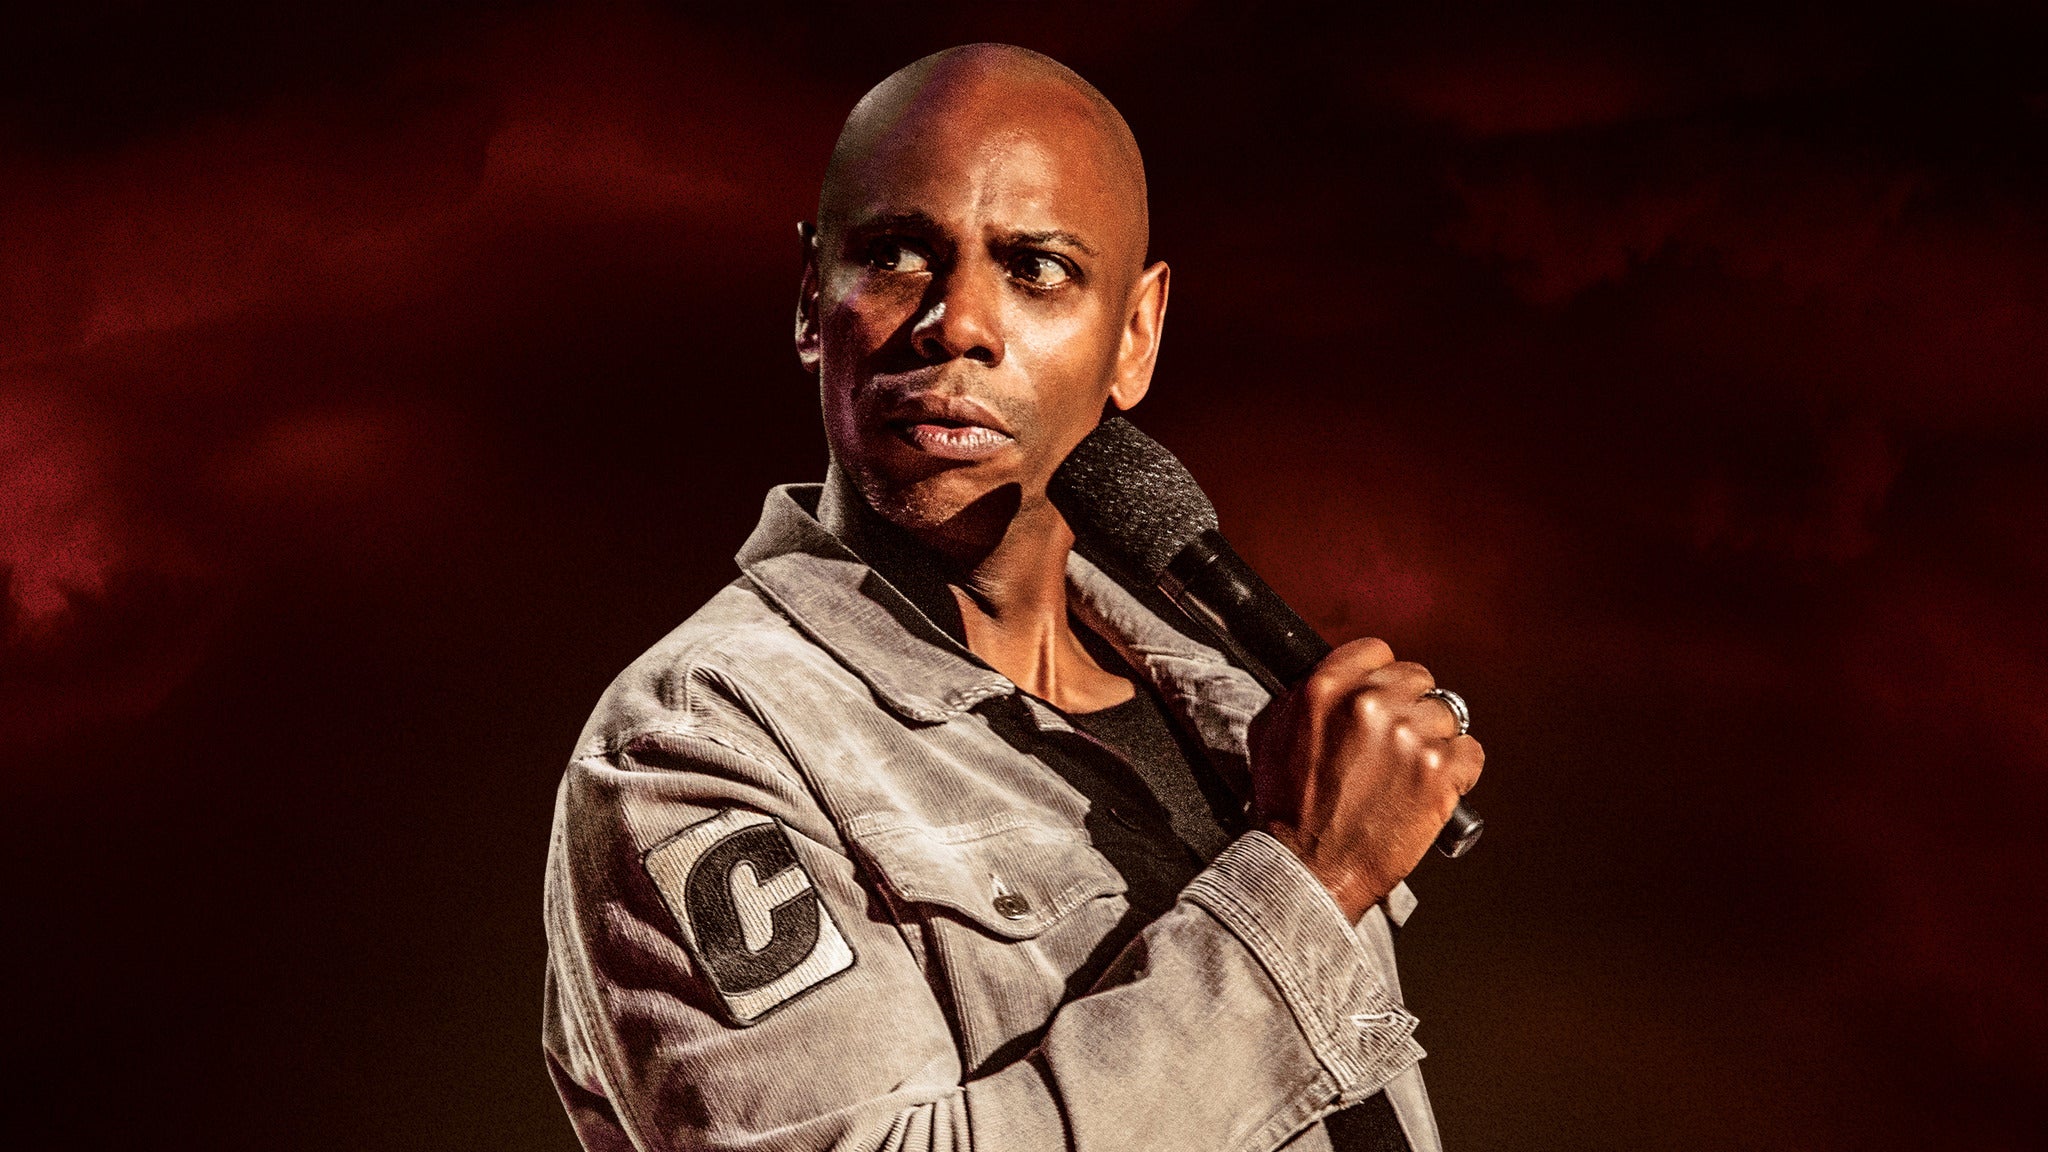 "Untitled" Dave Chappelle Documentary in Hollywood promo photo for Live Nation presale offer code